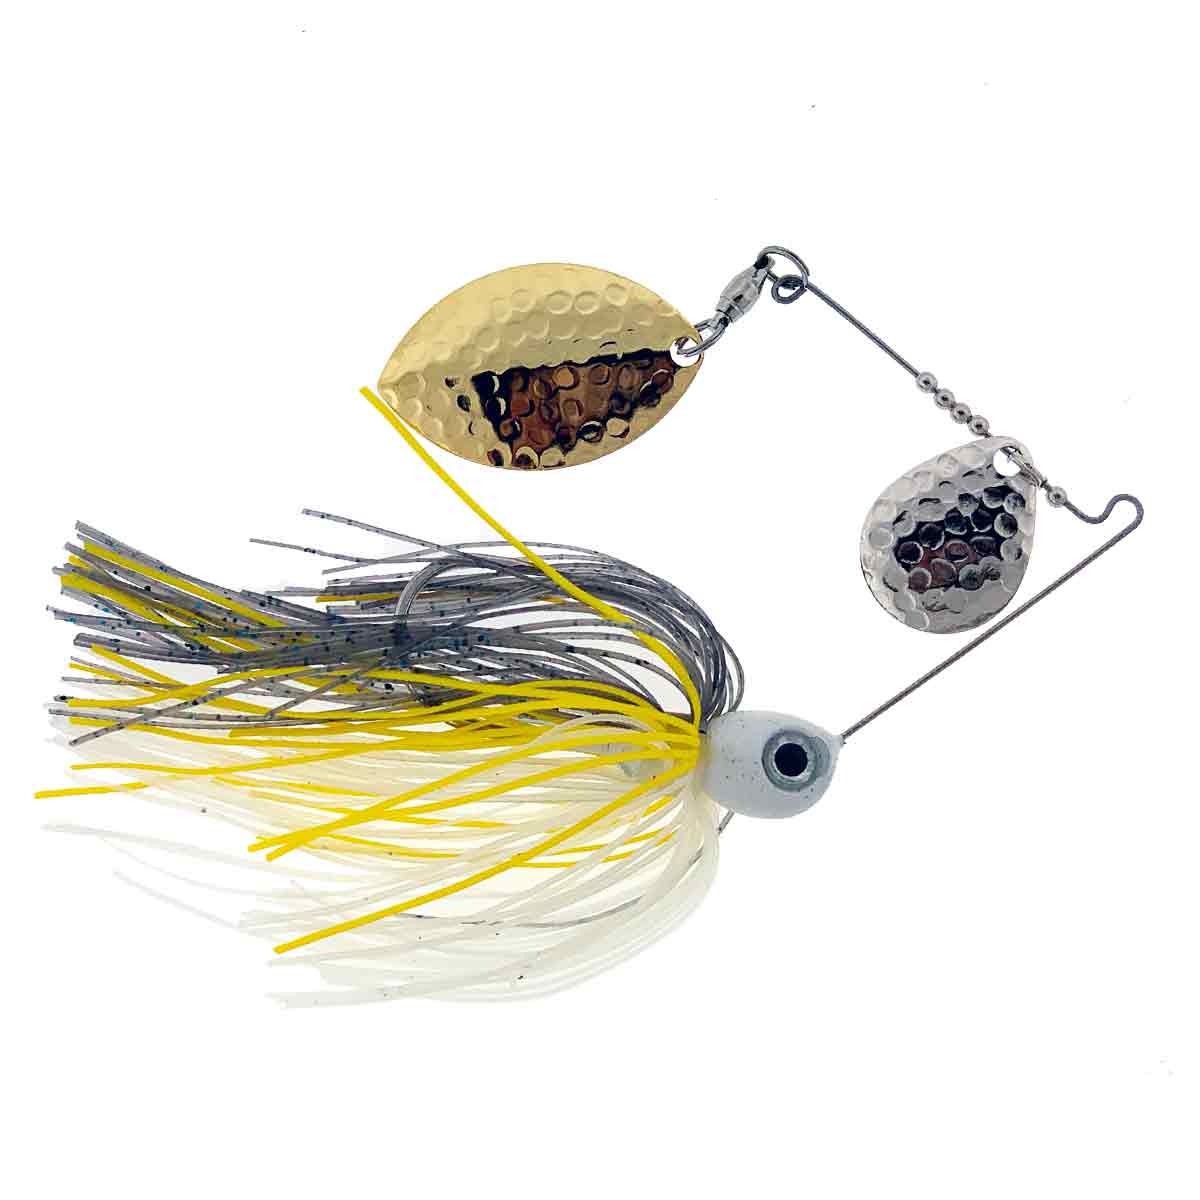 Mark Dove River Special Colorado/Turtle Spinnerbait_Sizzling Shad - Nickel/Gold